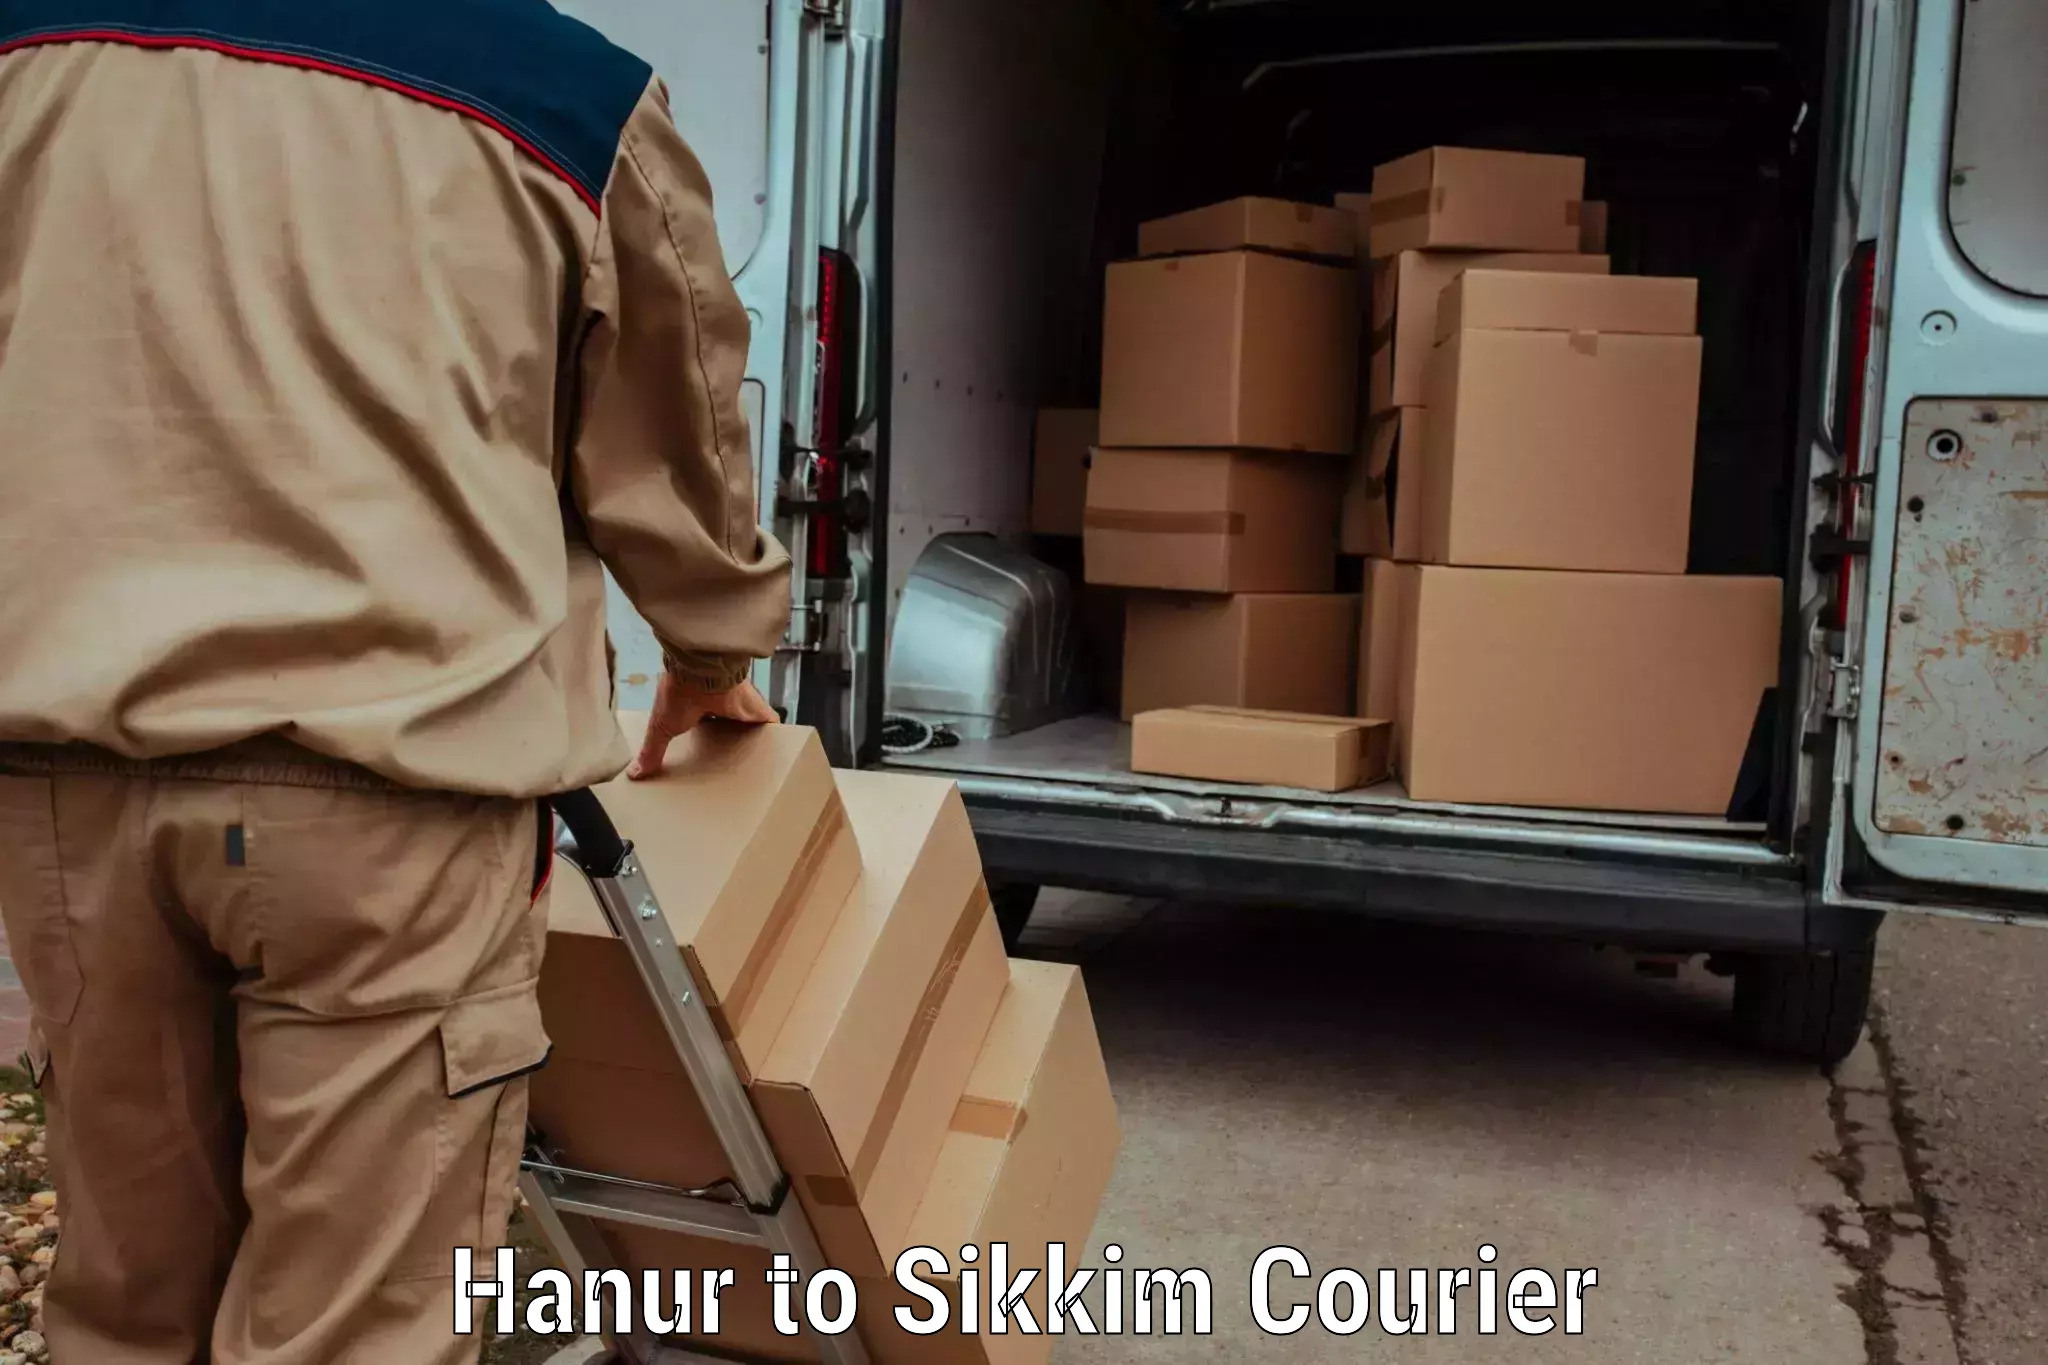 Courier service innovation Hanur to Pelling